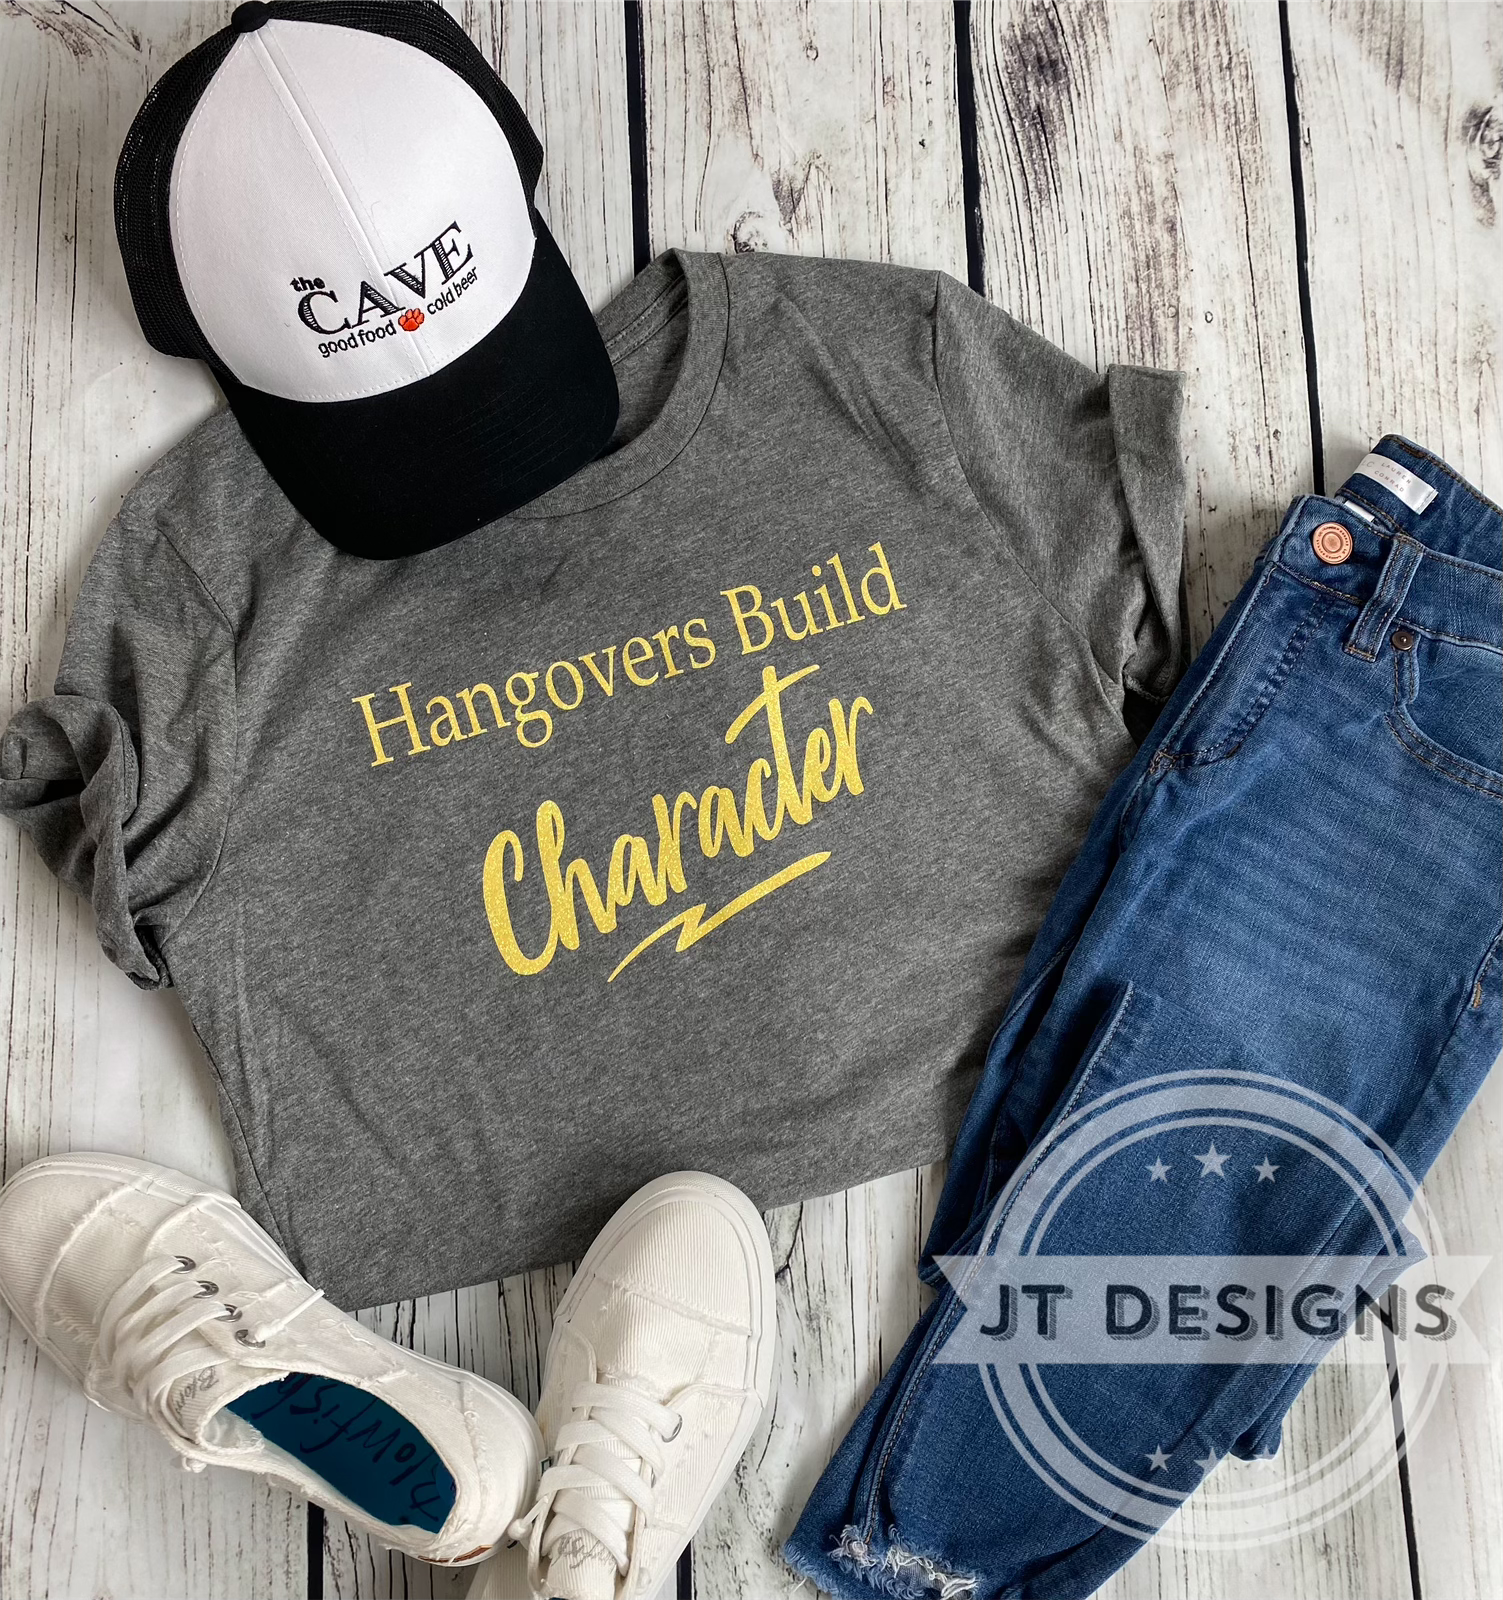 Hangovers build character – The JT Designs